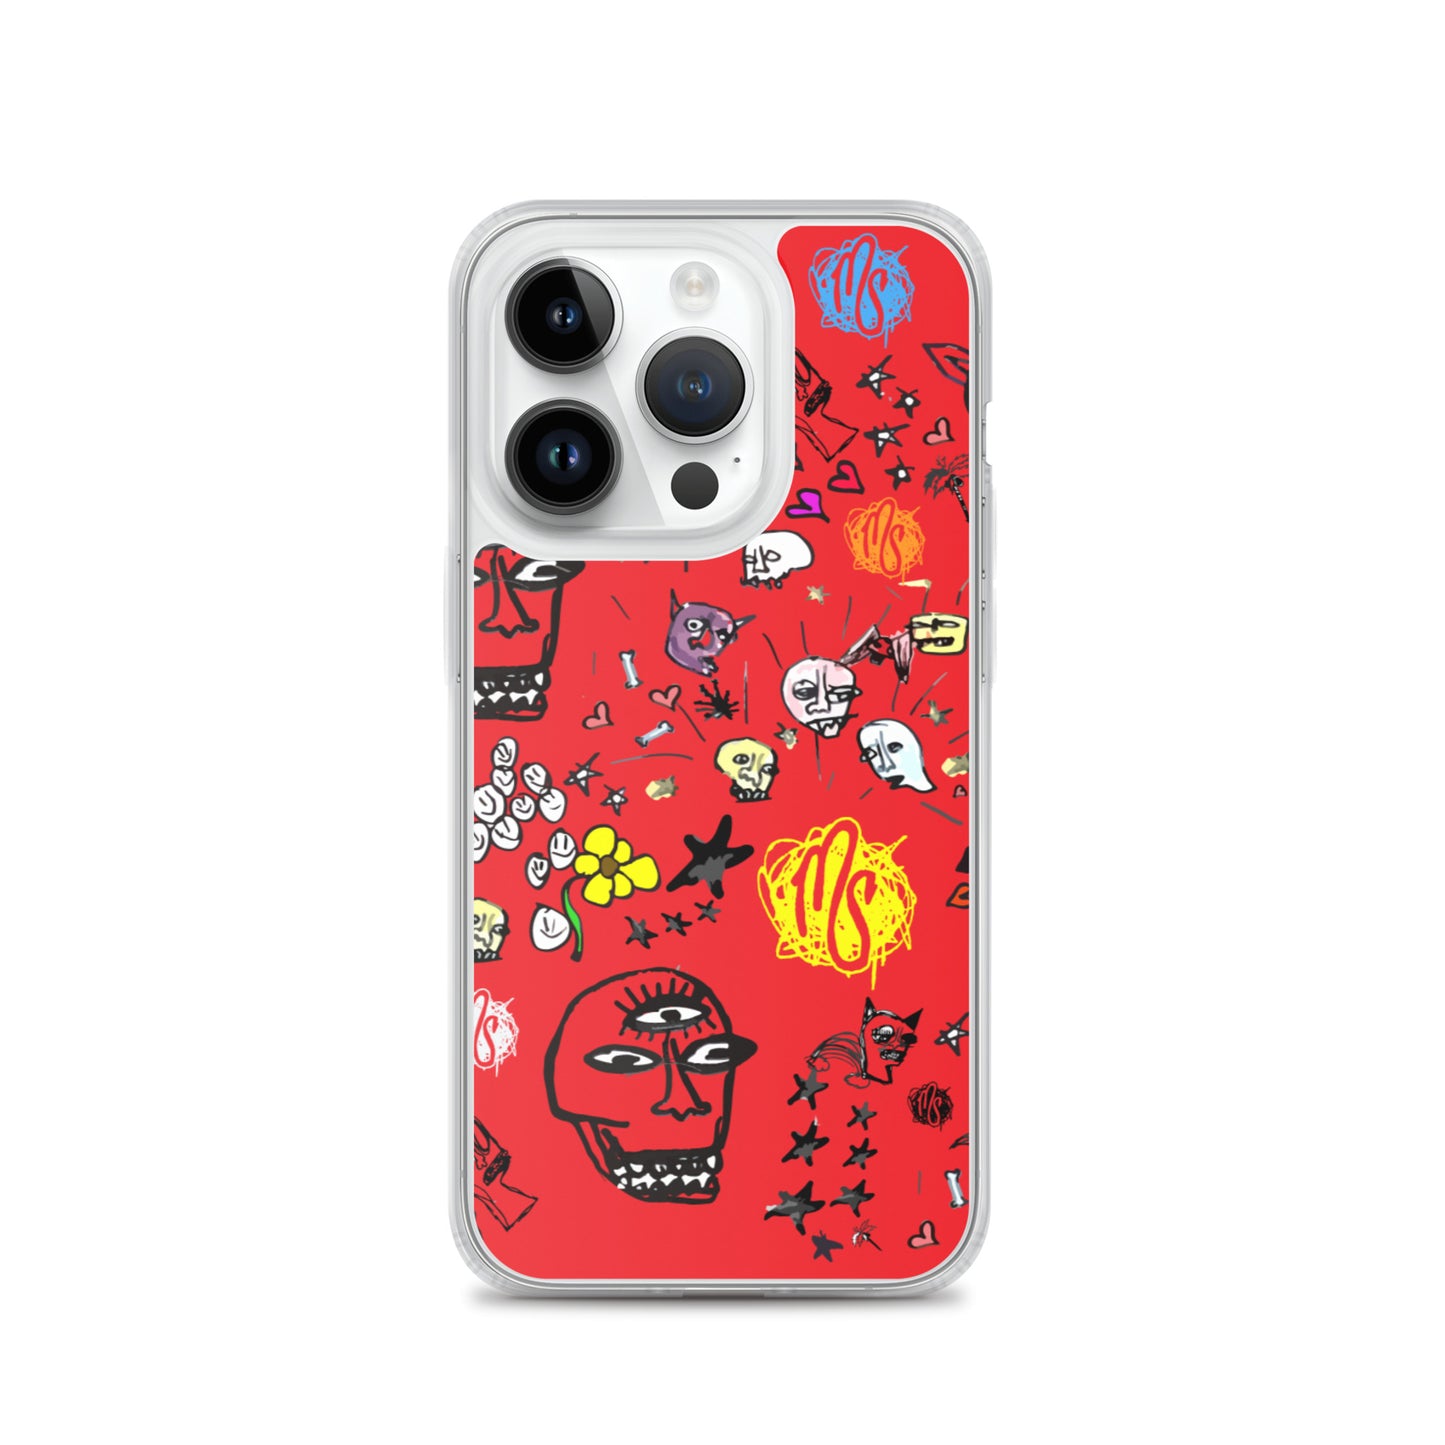 Art All Over Red iPhone Case